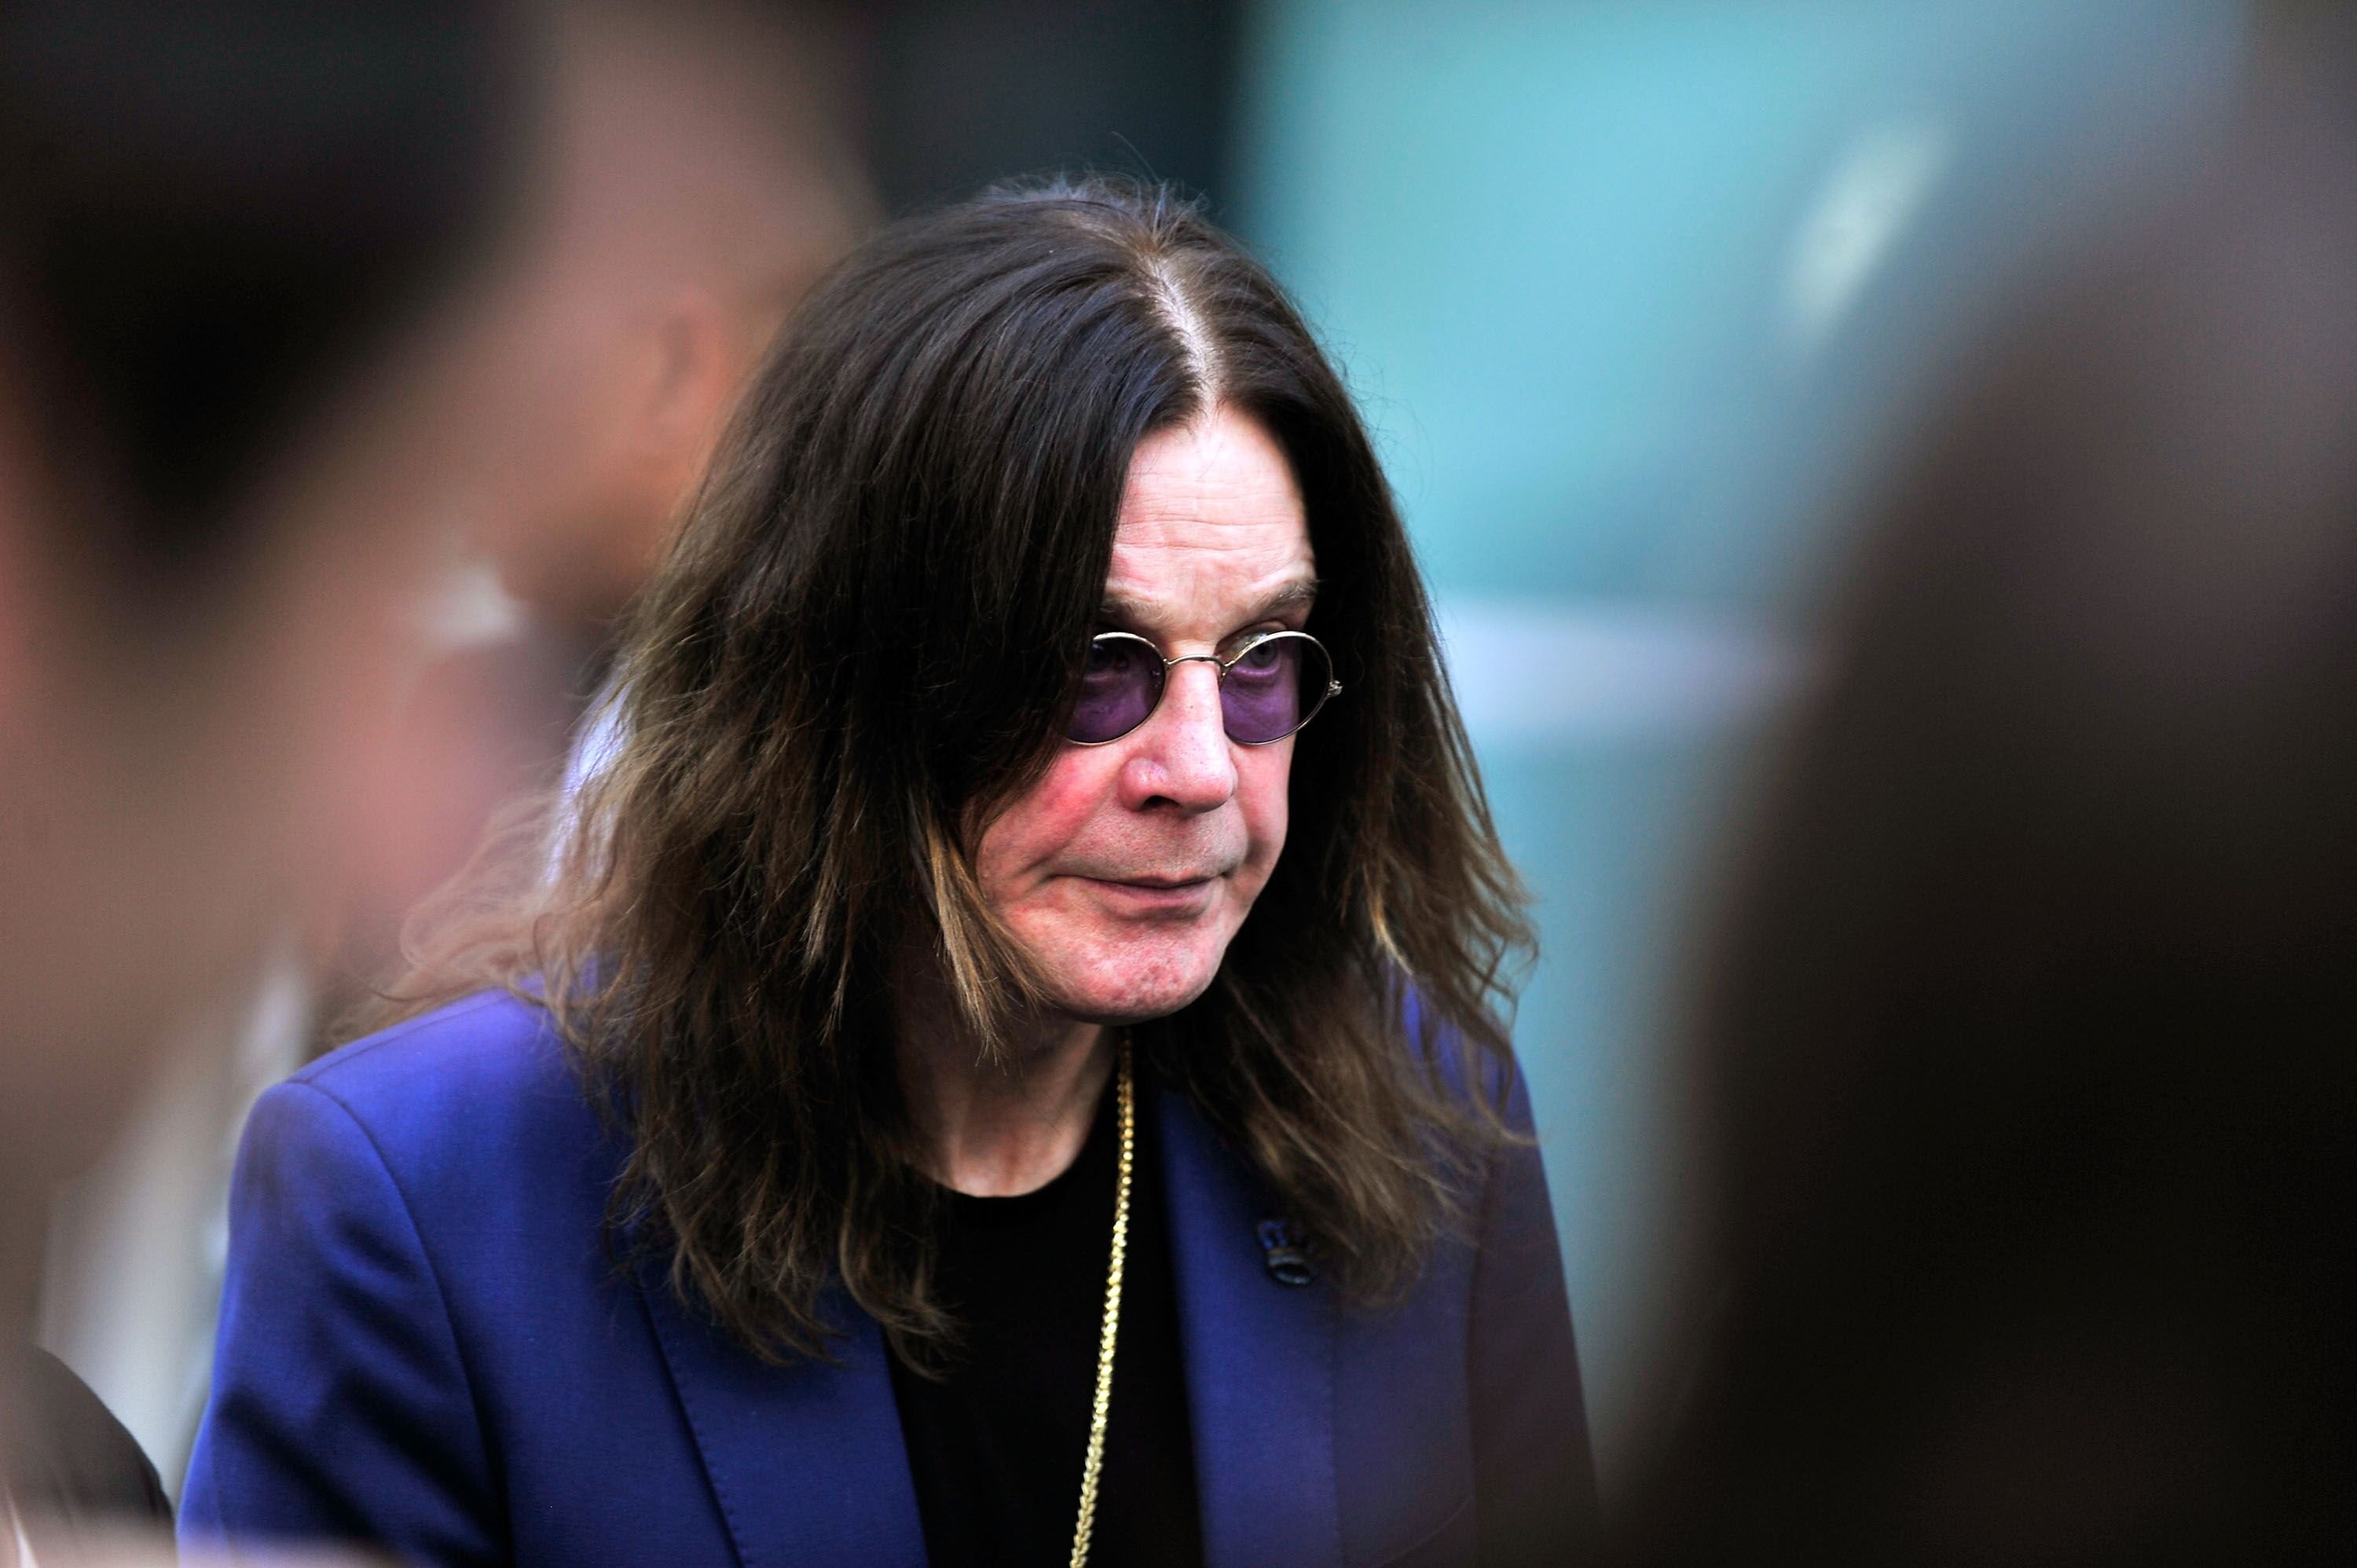 Ozzy Osbourne attends the premiere of "Amy." | Source: Getty Images